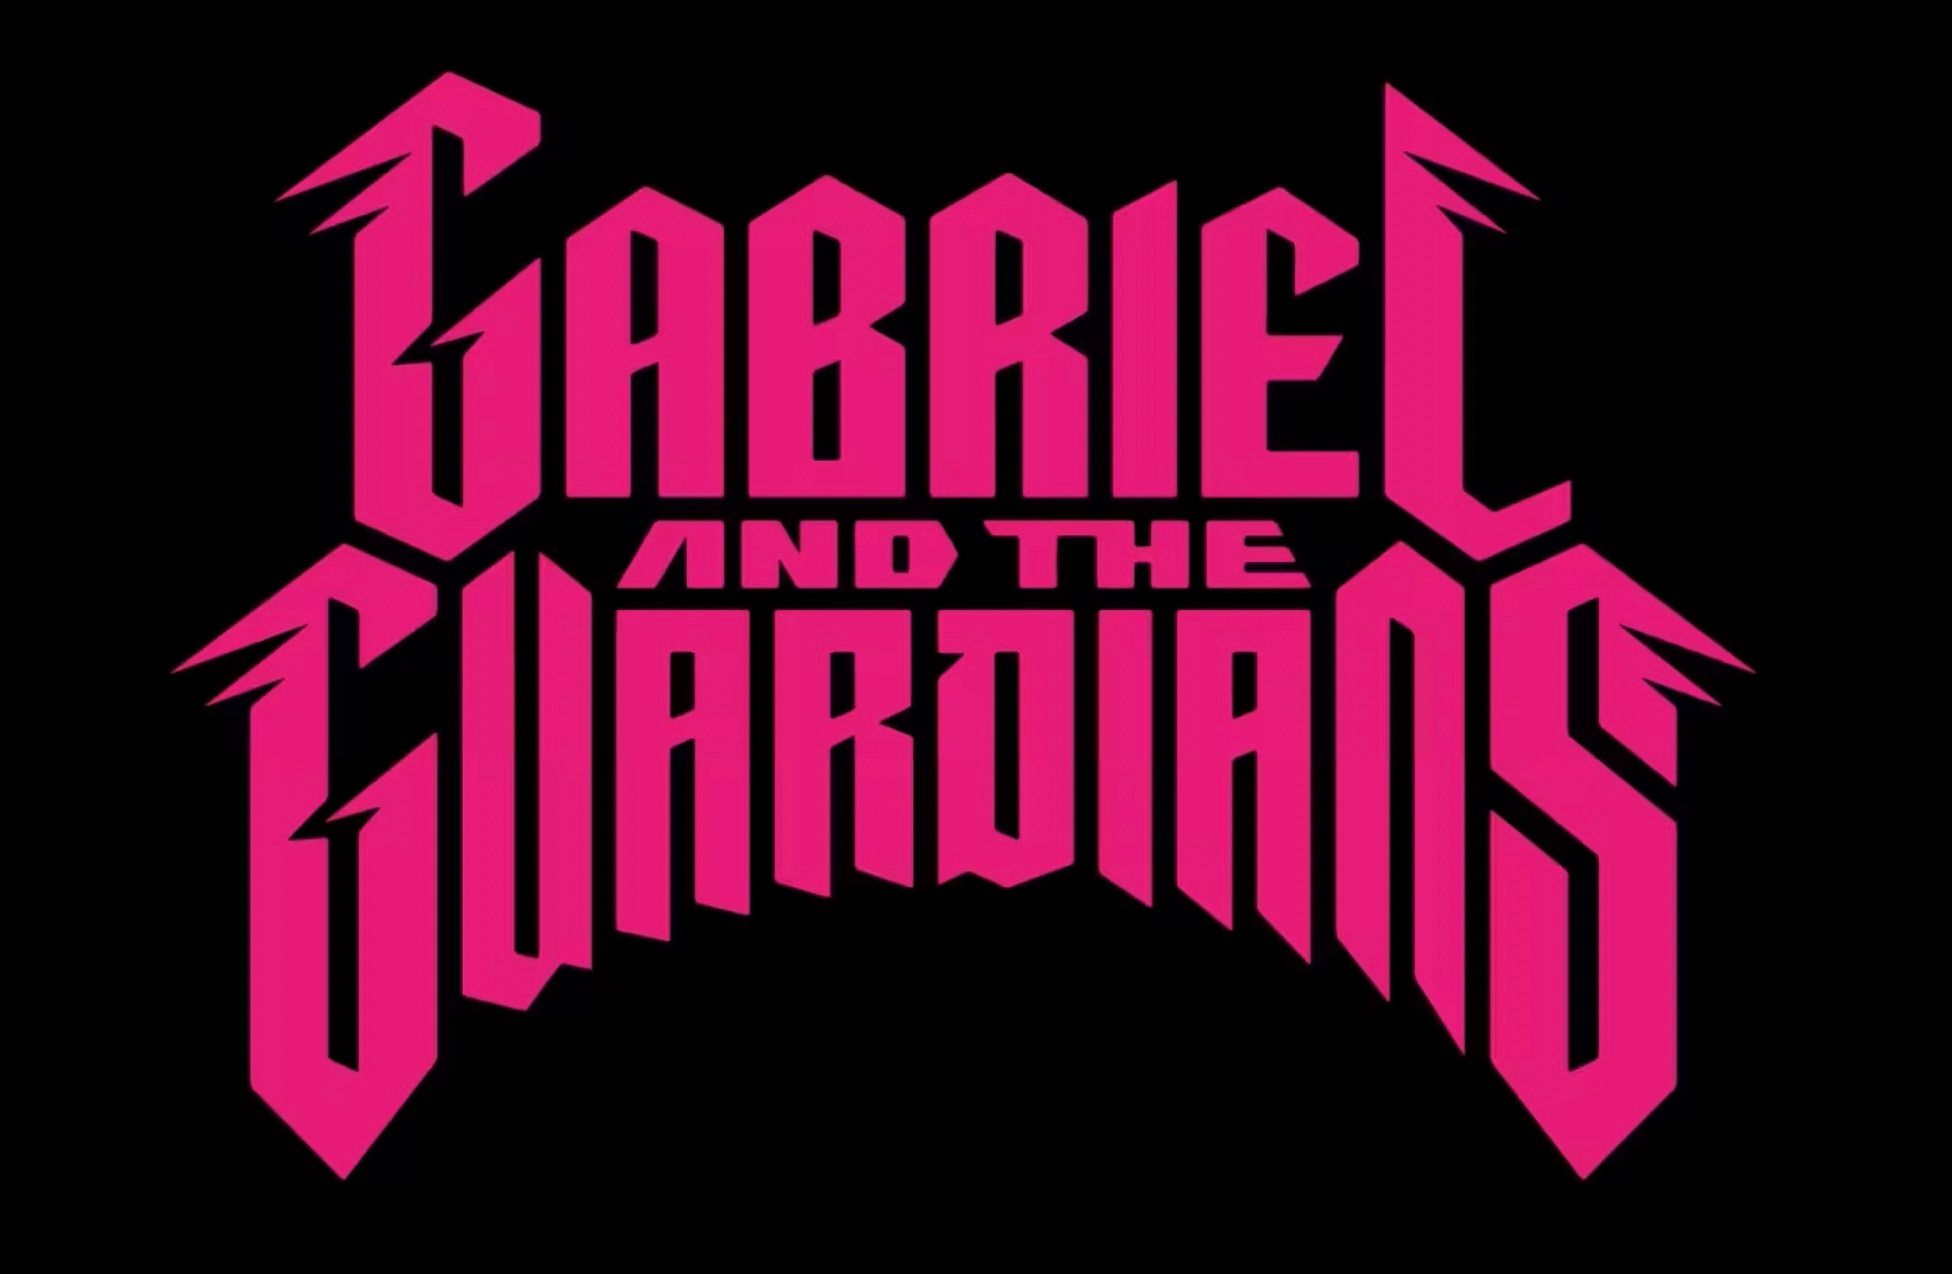 Gabriel and the Guardians Livestreams Introduction of Characters, Story World, and Announces GalaxyCon Appearance